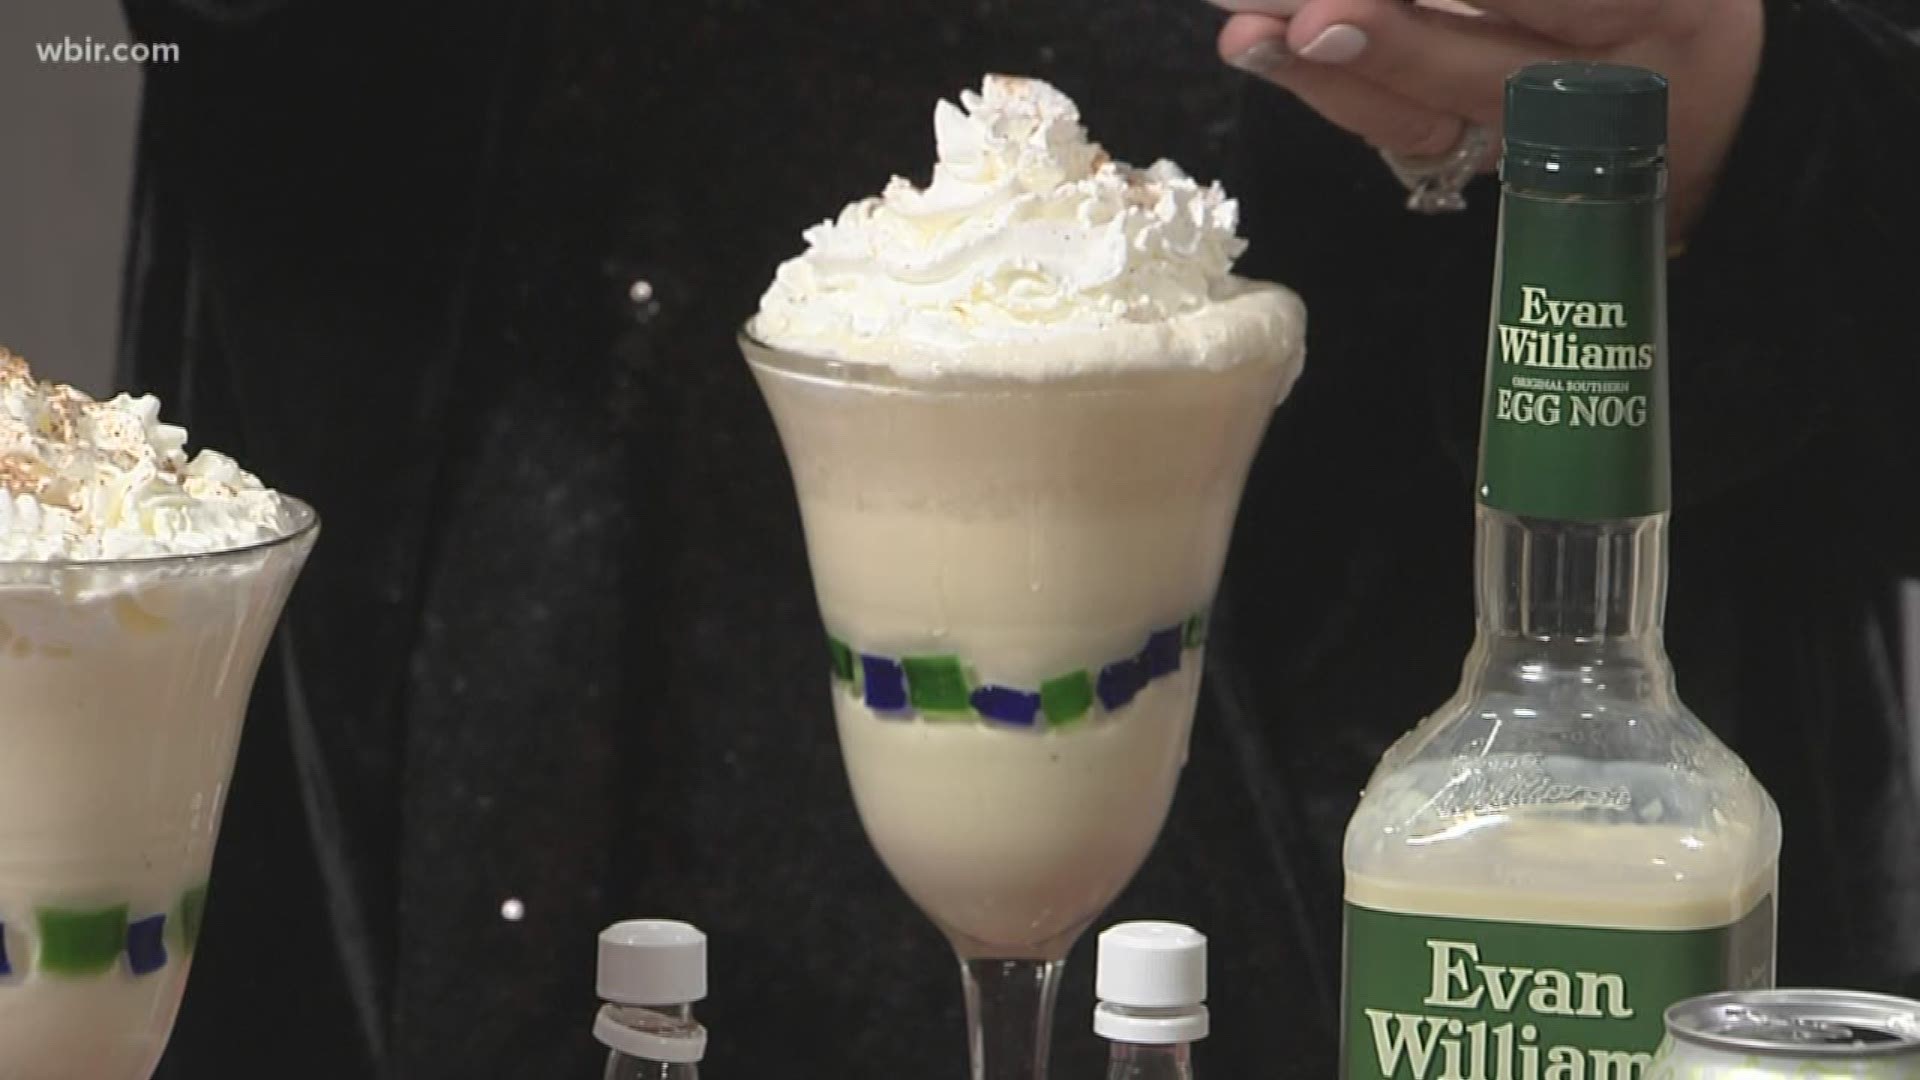 It's All So Yummy Cafe shows us how to make an eggnog shake.